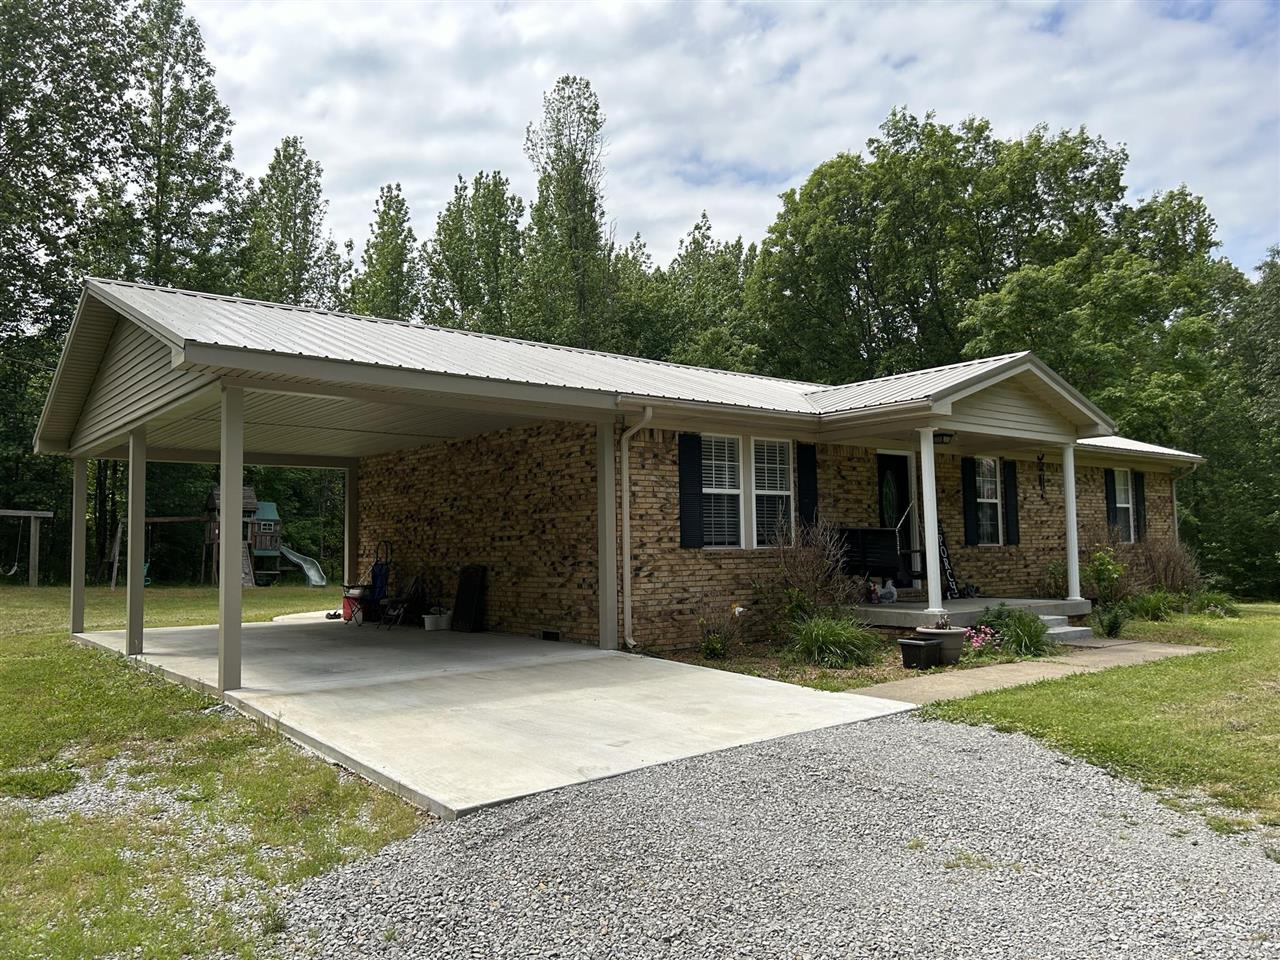 Beautiful 3 bedroom, 1 bathroom ranch style home setting on 0.85 acres in northern Butler Co.  Charming, country setting with a spacious yard.  Updated flooring in kitchen, living room, and hallway.  Eat in kitchen.  More pictures to come.